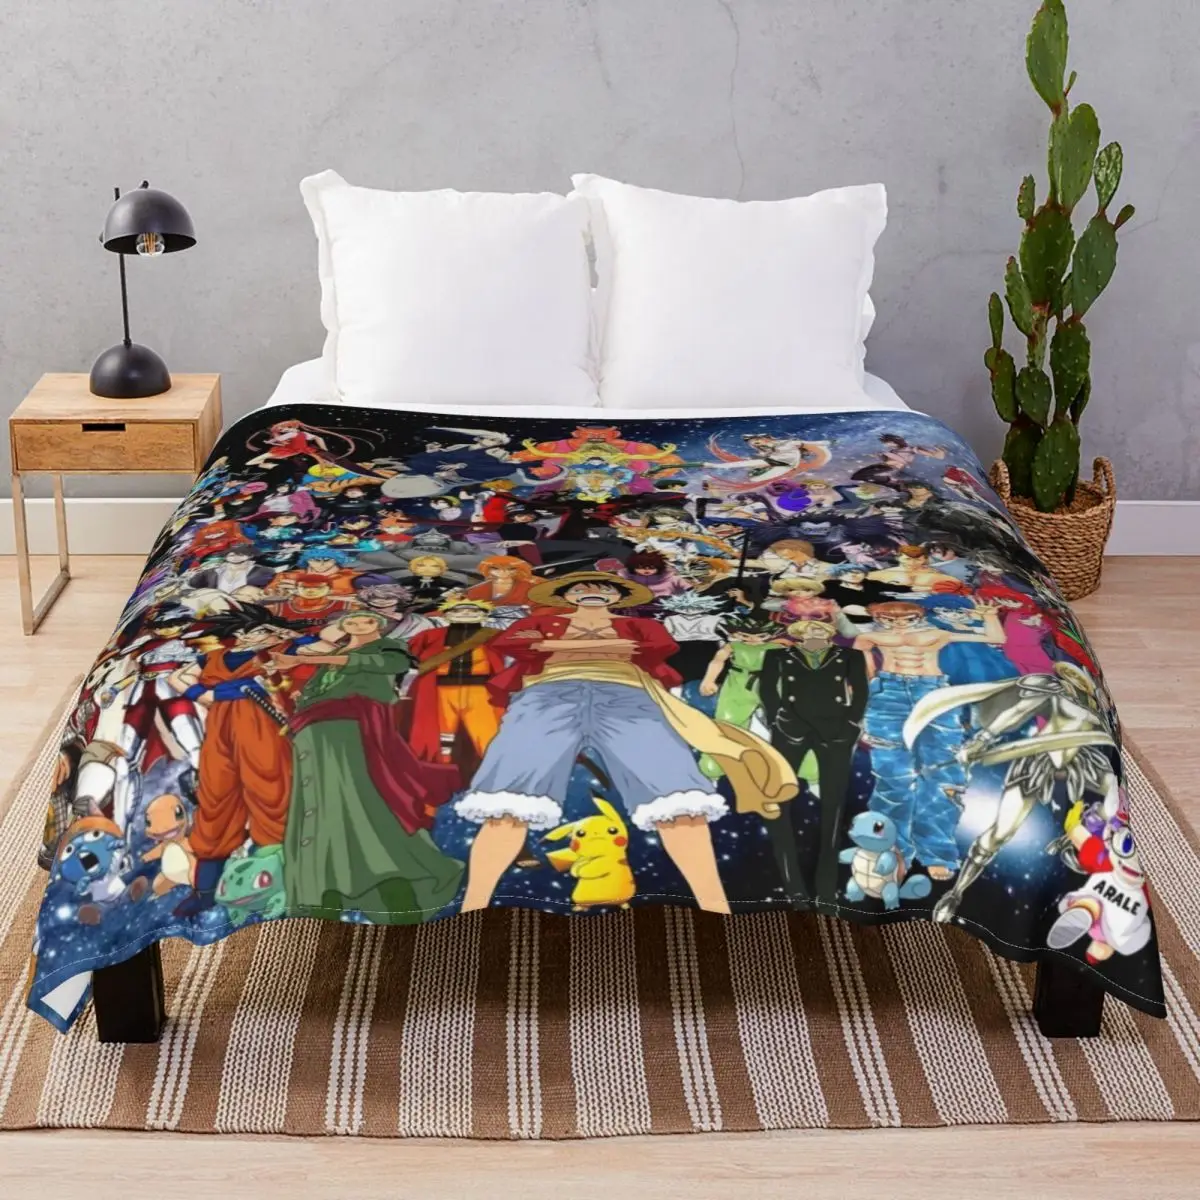 Many Character Of Anime Blankets Flannel Decoration Super Soft Throw Blanket for Bed Sofa Camp Cinema